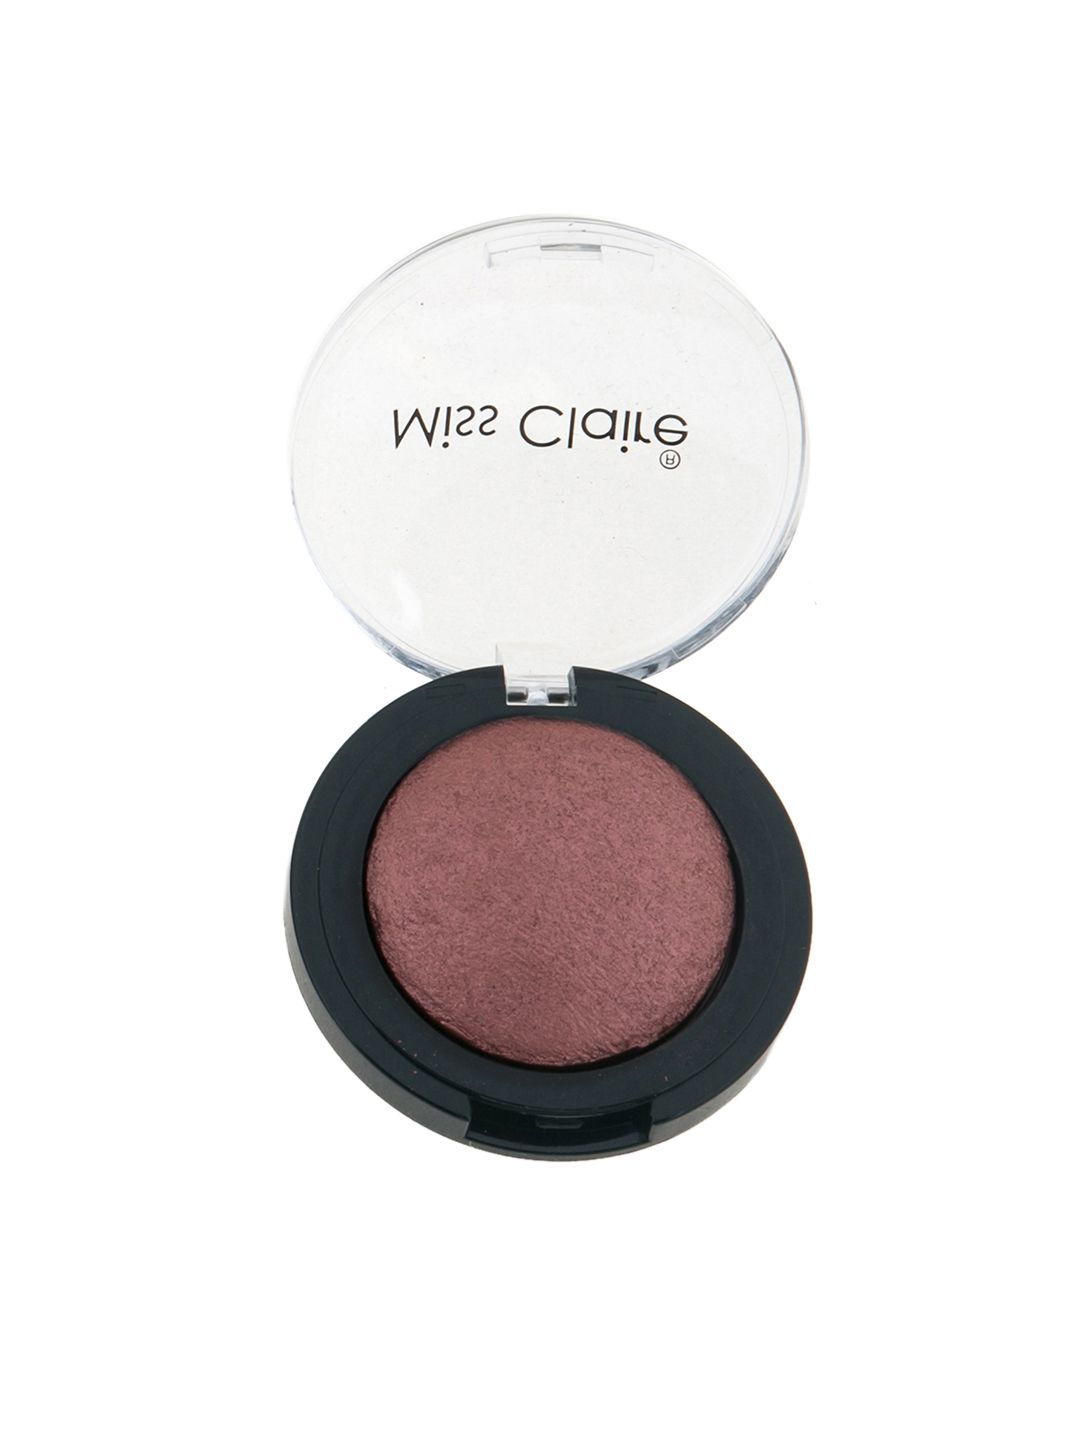 Miss Claire 09 Baked Eyeshadow 3.5g Price in India